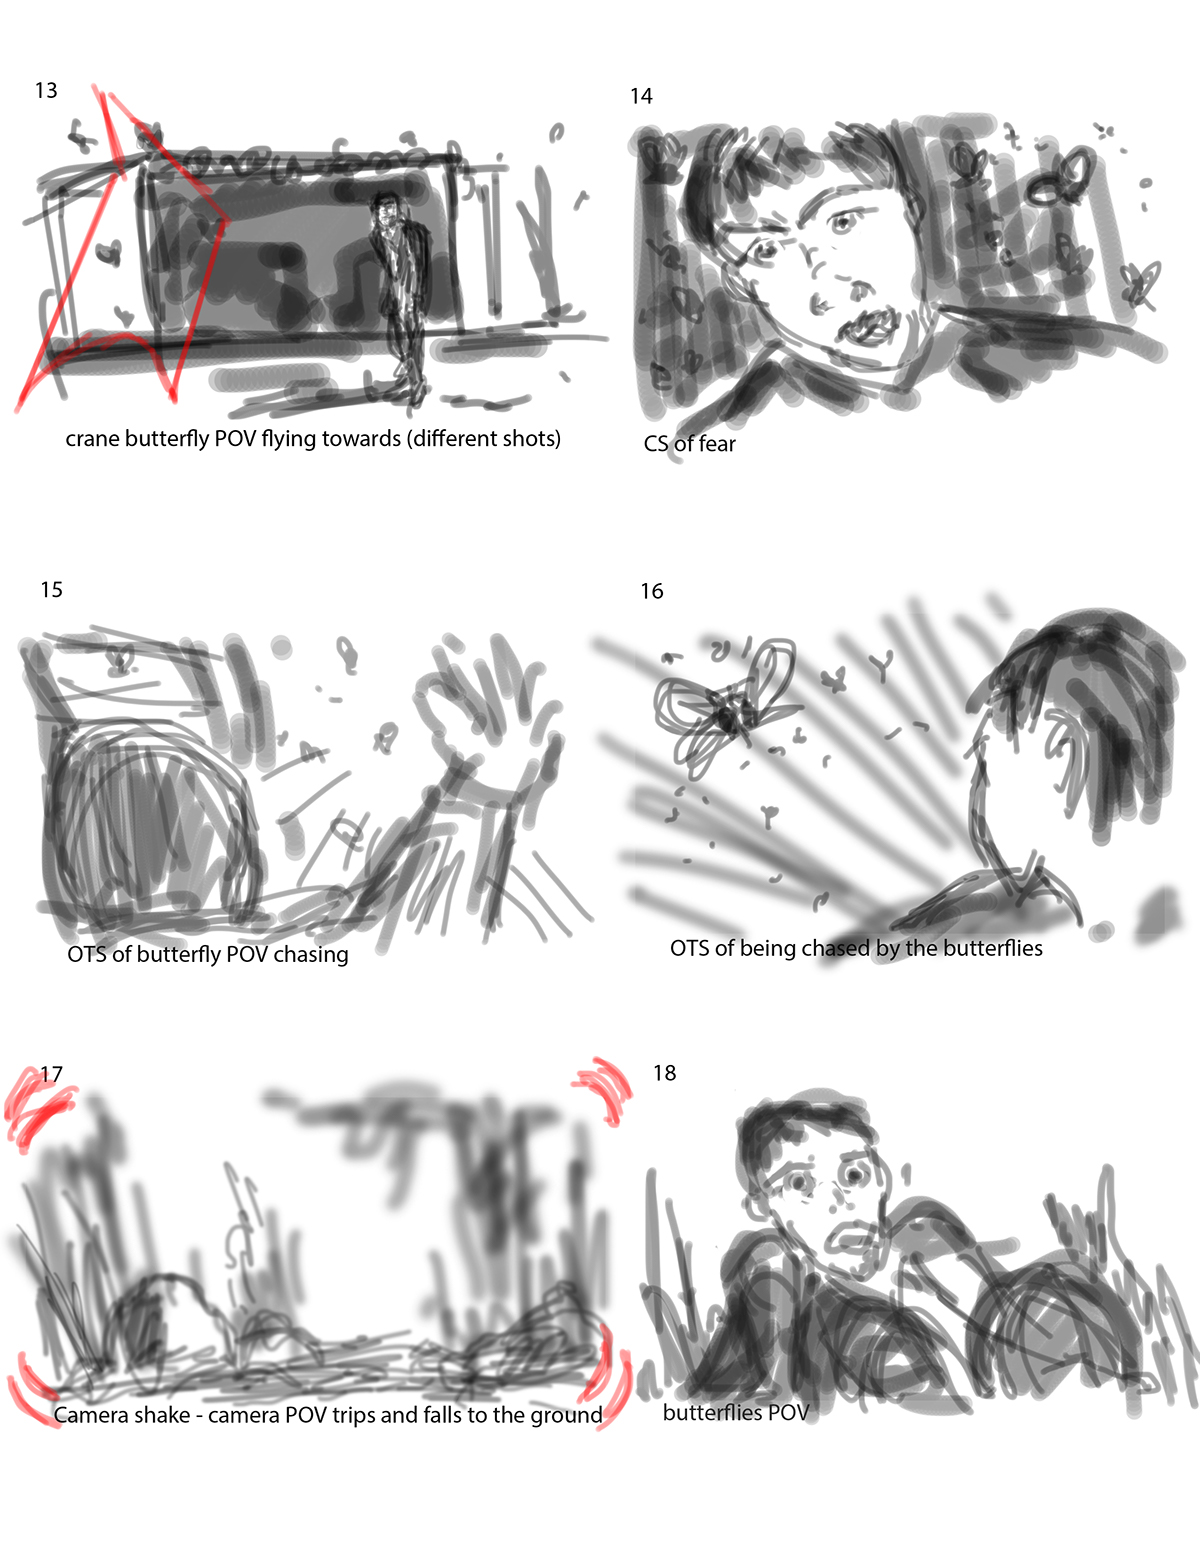 Storyboards sketches drawings illustrations photoshop